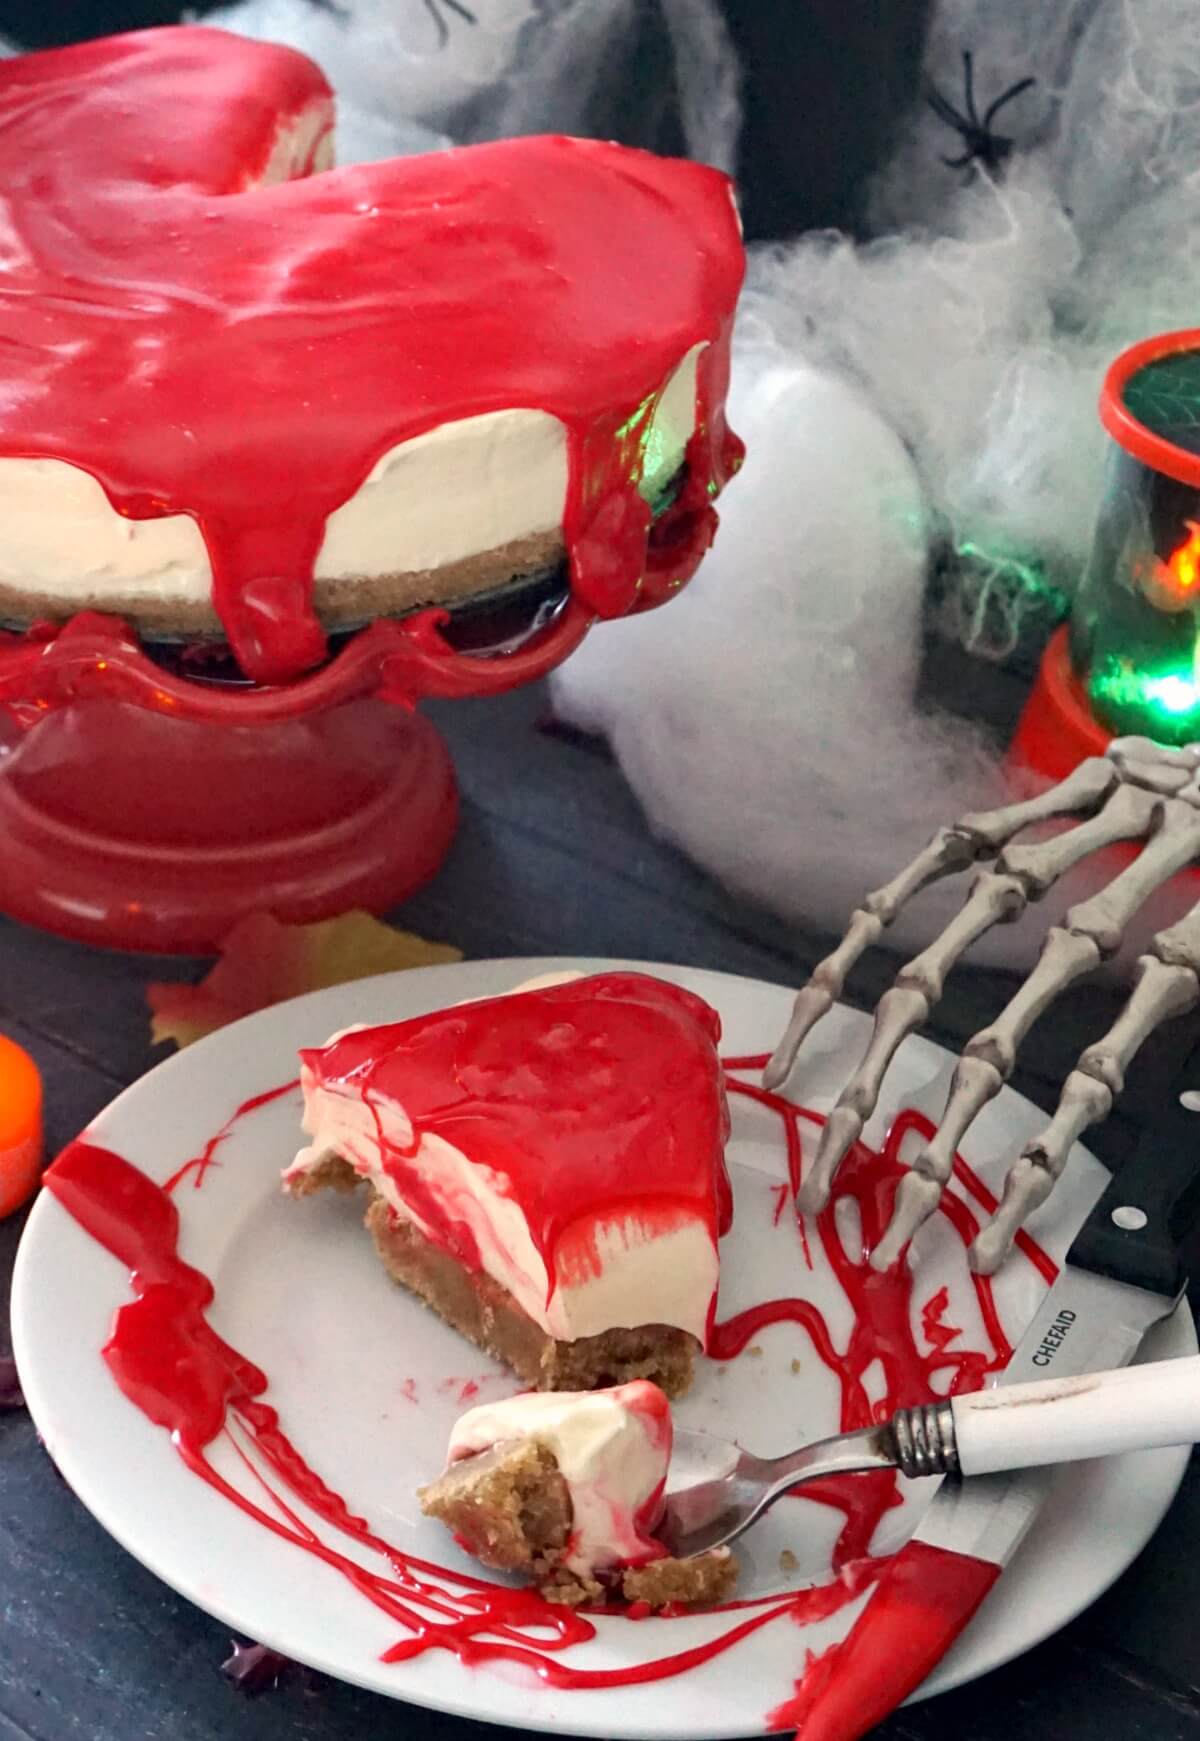 A slice of bloody cheesecake on a white plate with Halloween decorations around.